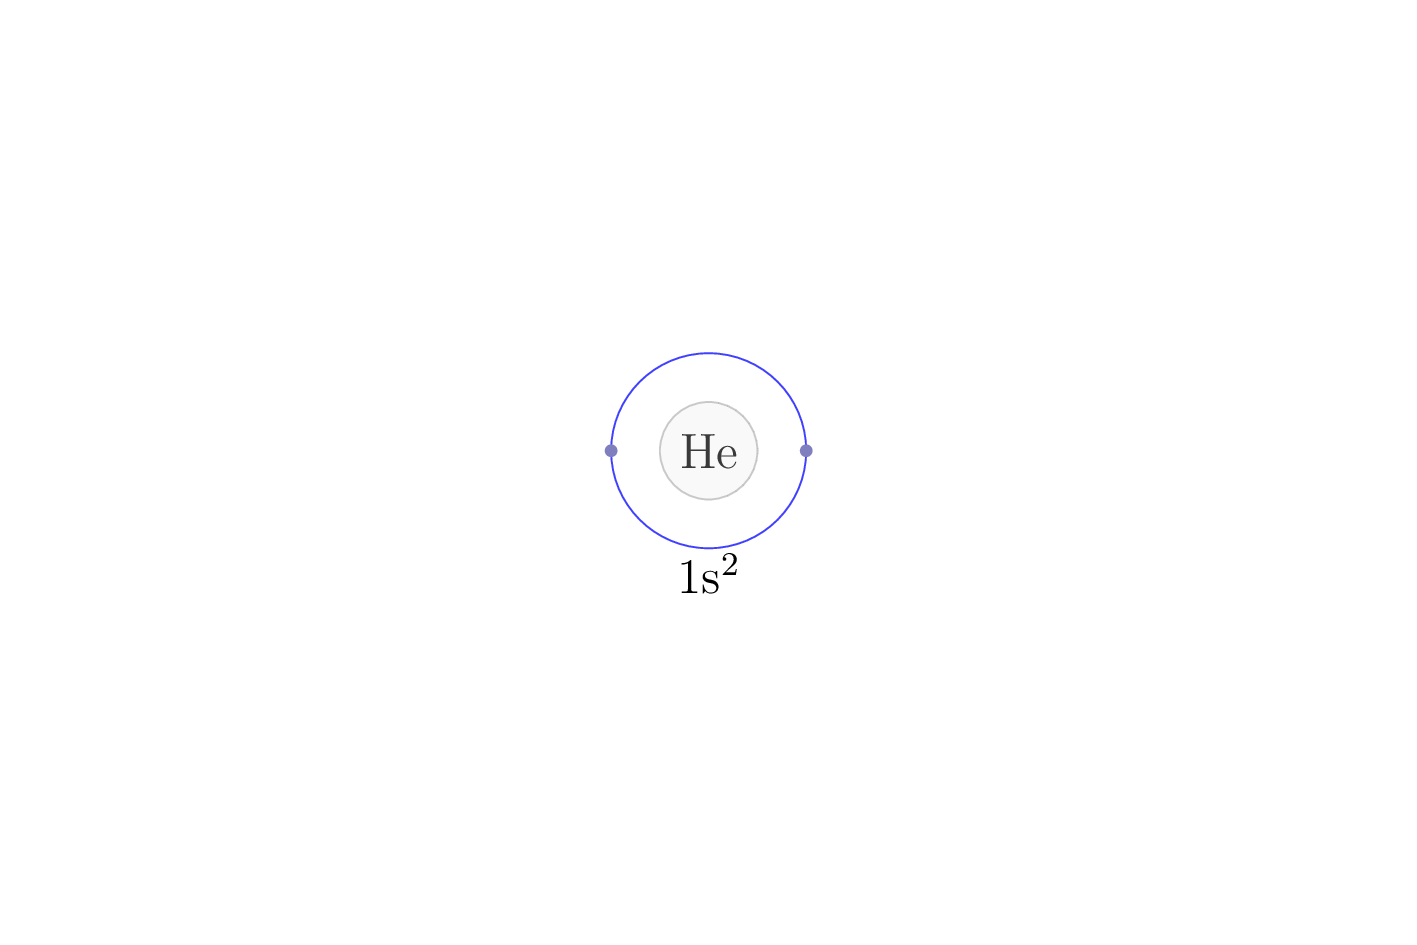 electron configuration of element He